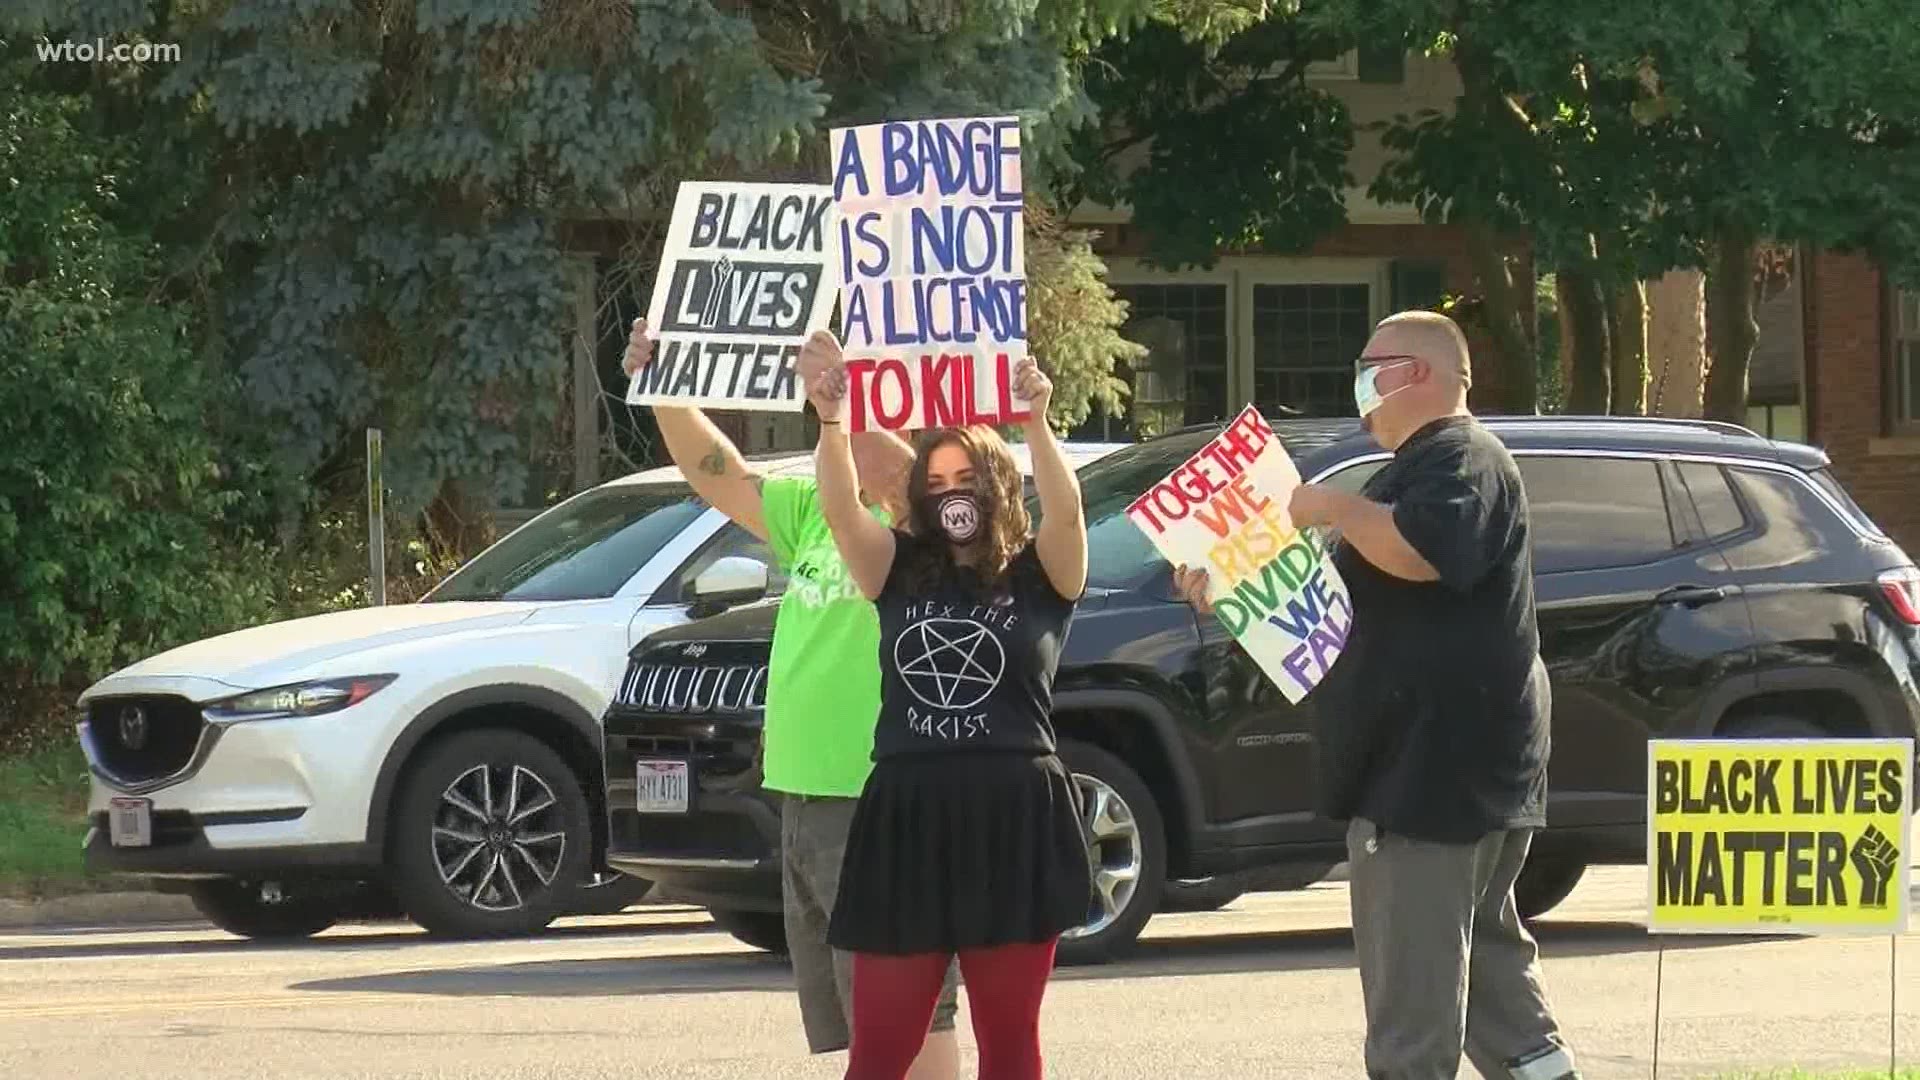 Protesters continue push for police reform, calling for more investment in community programs.